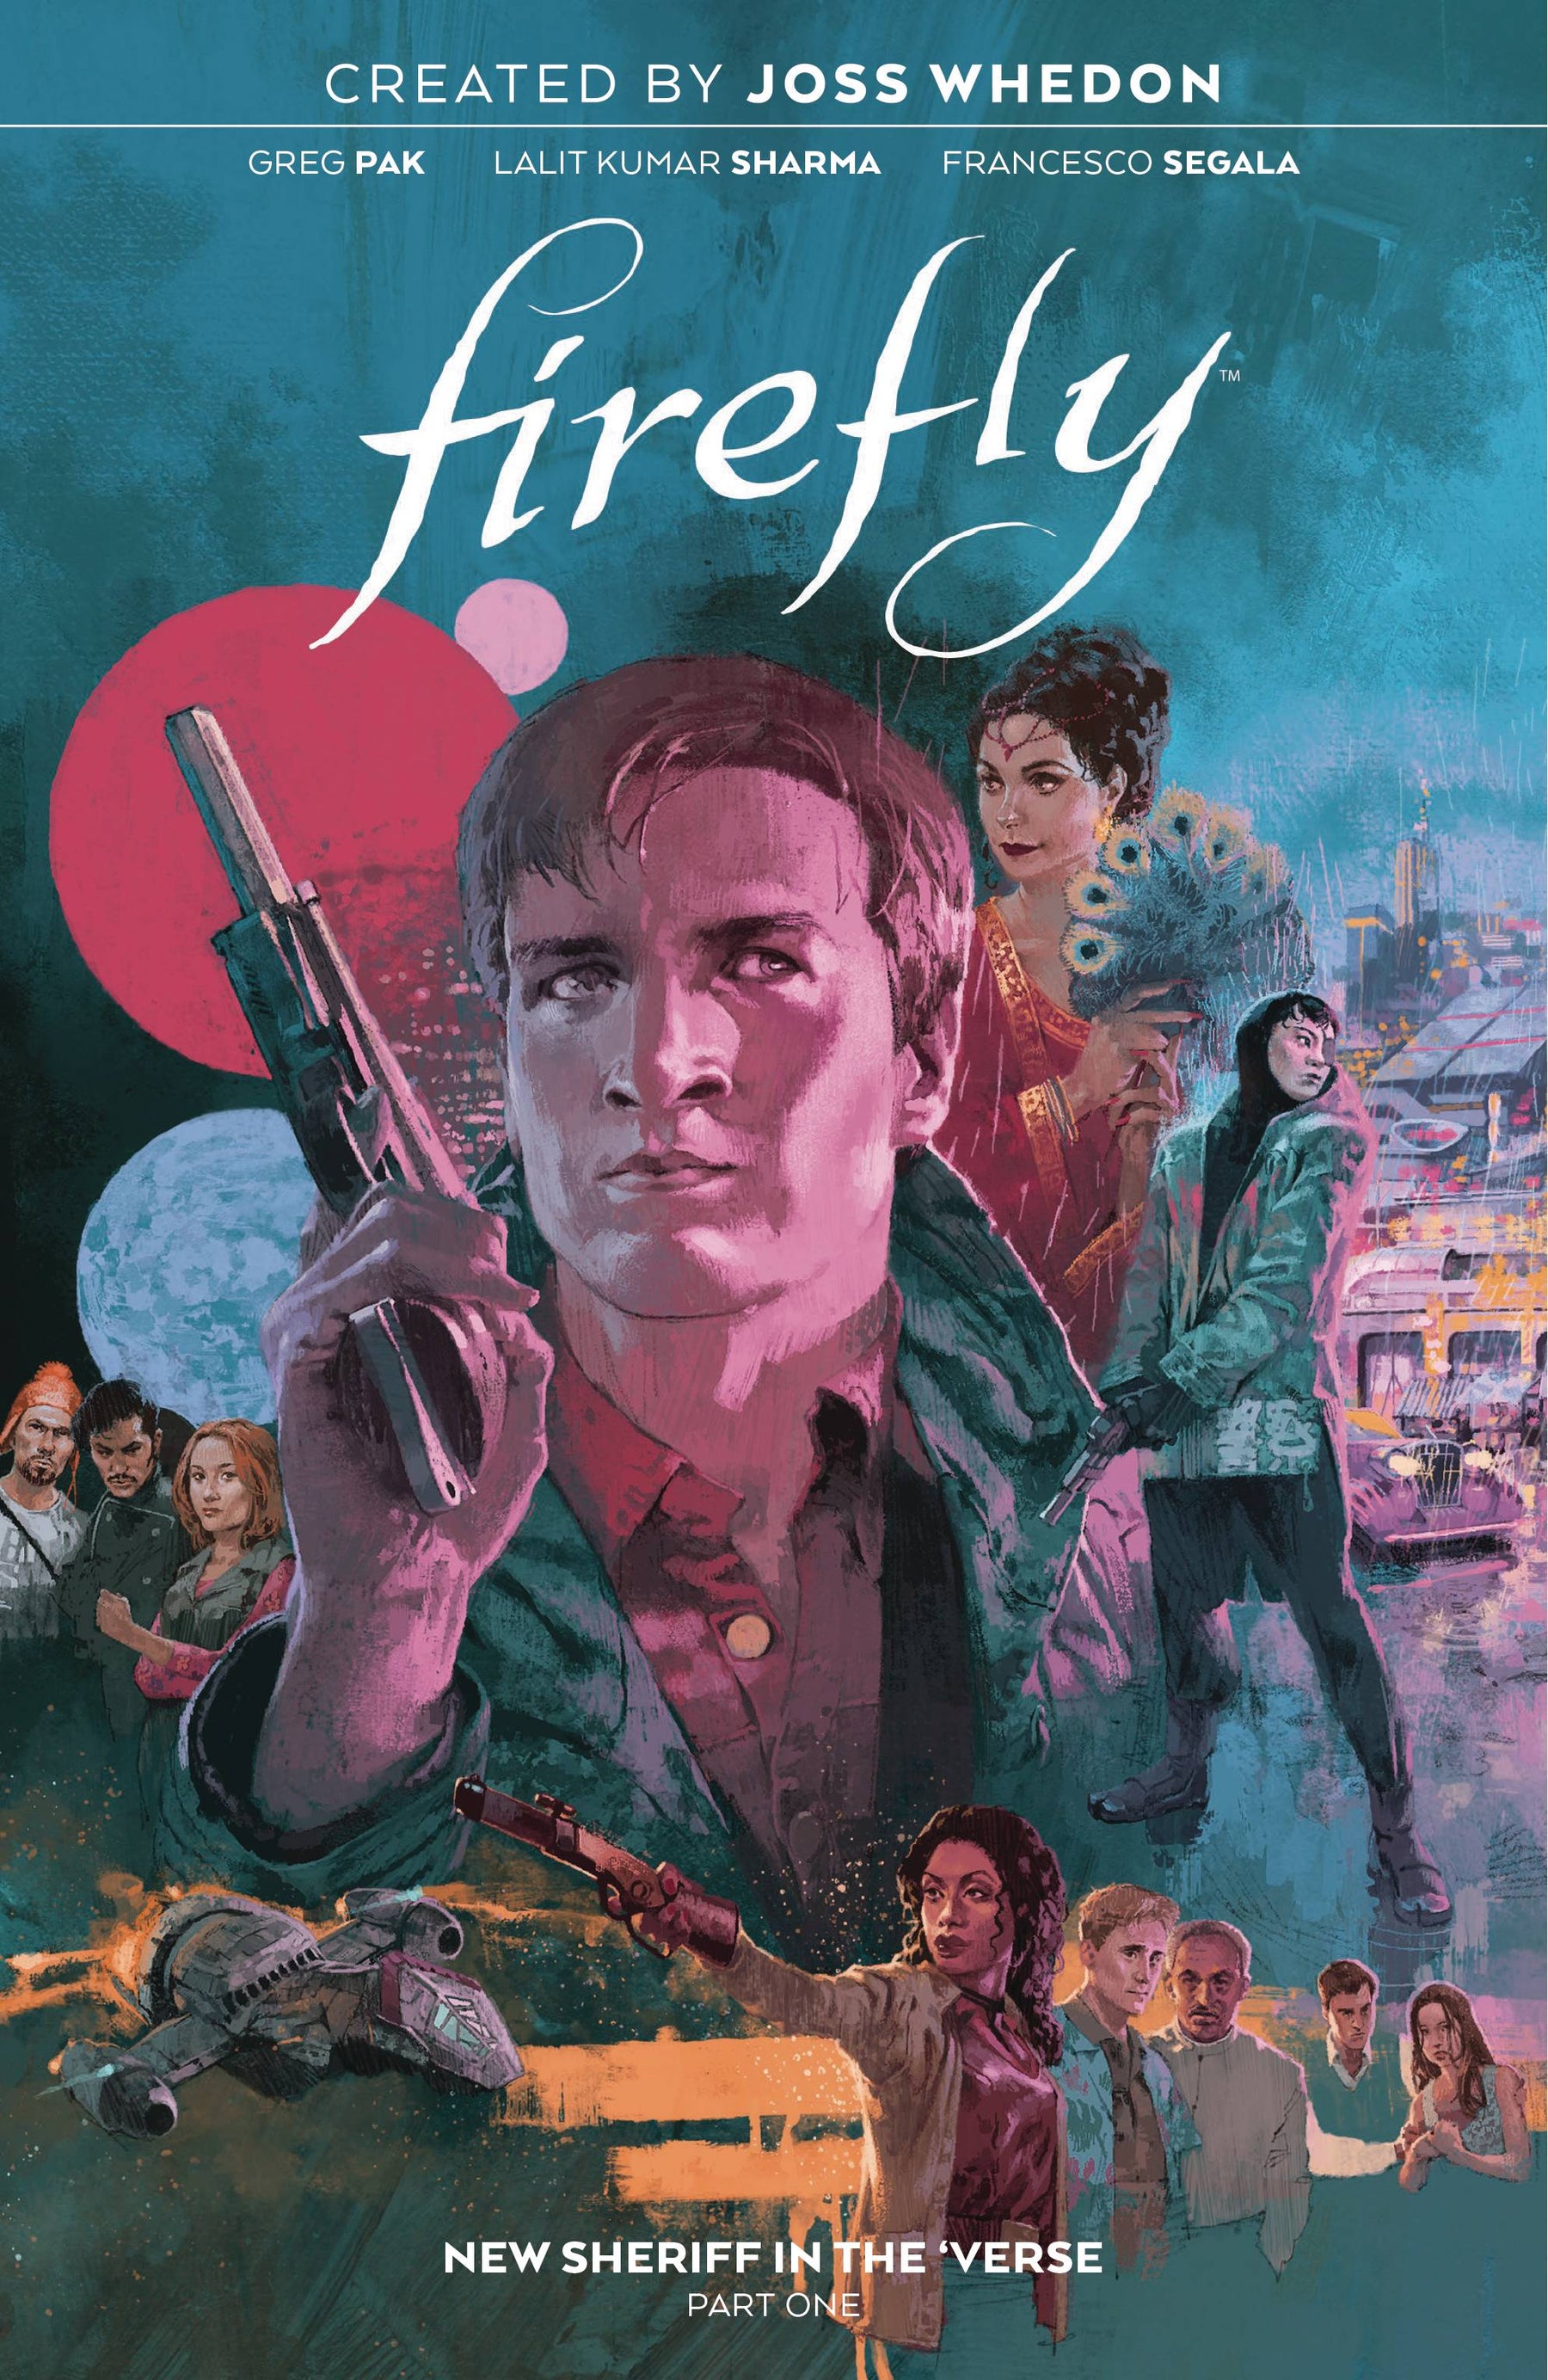 FIREFLY NEW SHERIFF IN THE VERSE TP VOL 01 (C: 0-1-2) - Third Eye